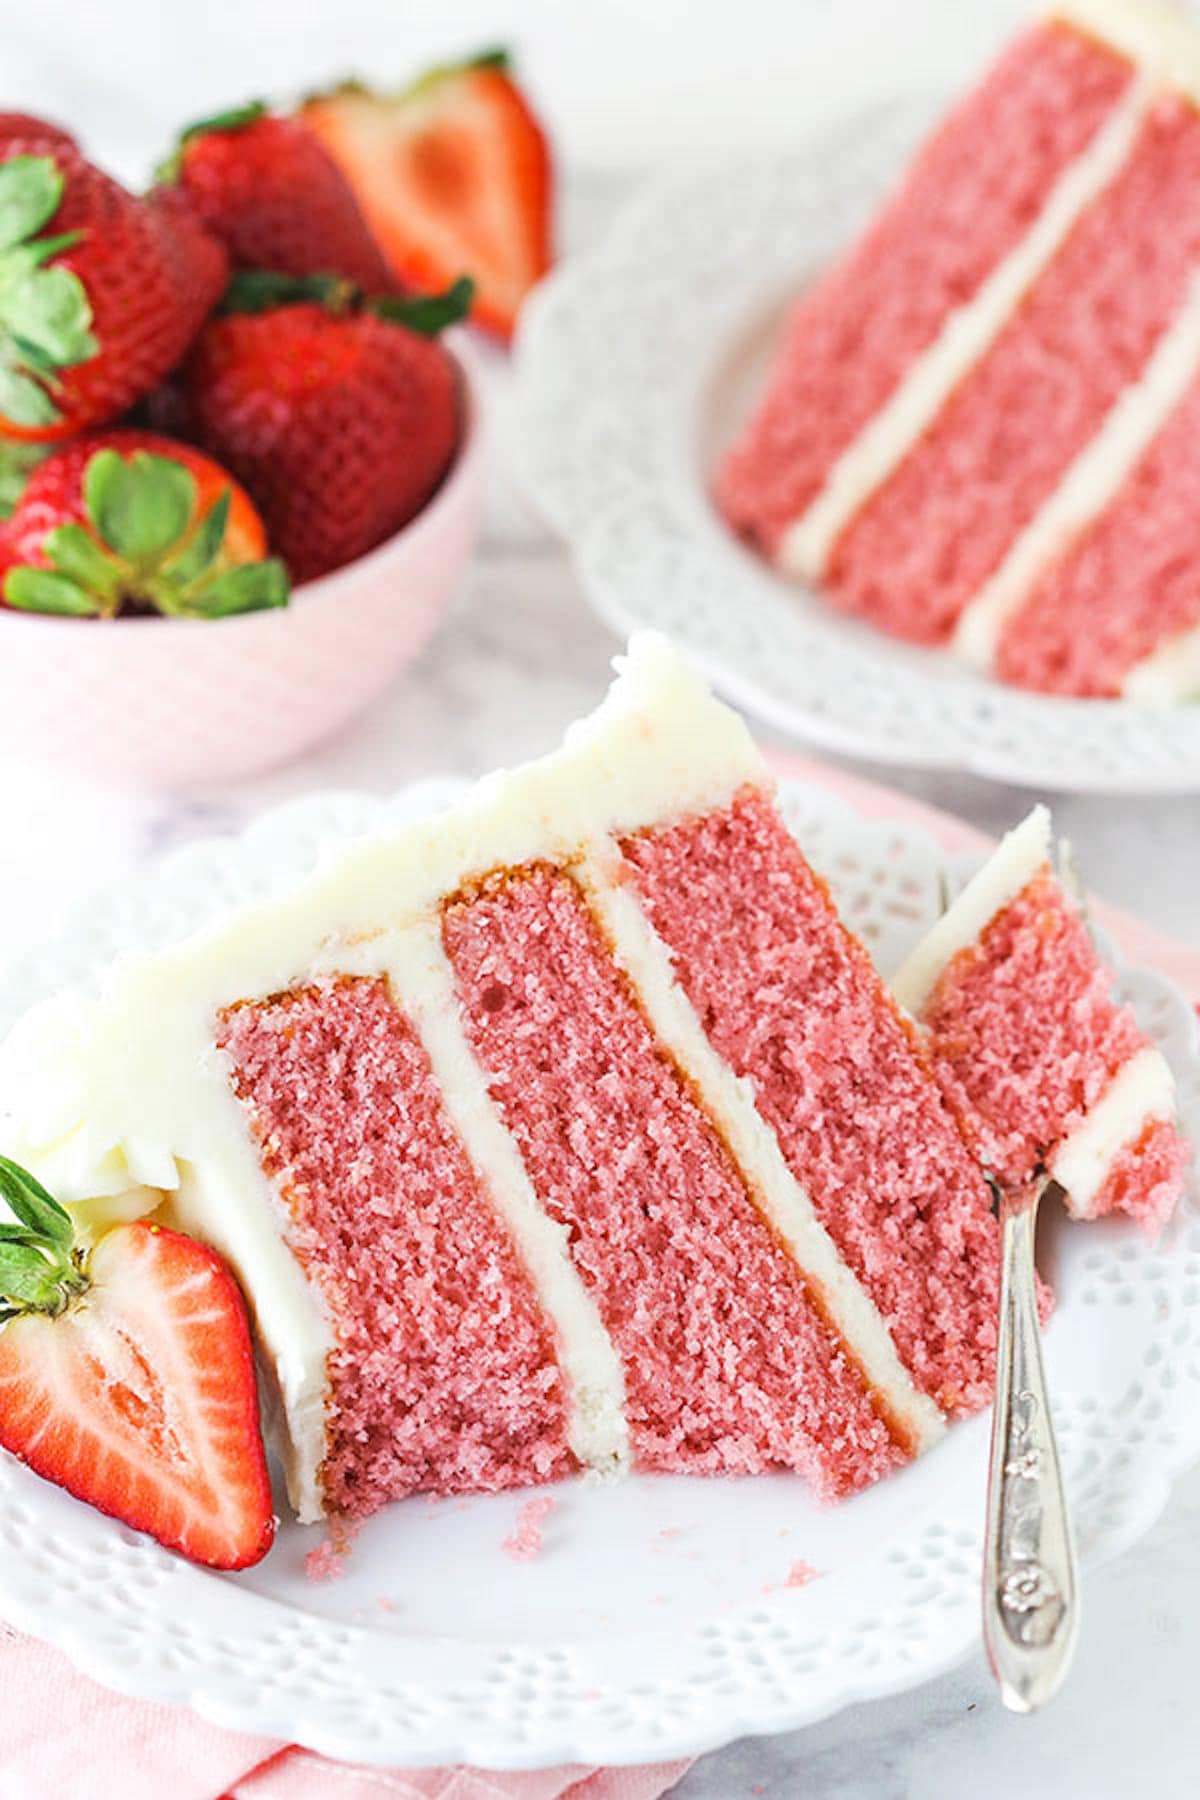 A Piece of Strawberry Layer Cake on a Plate with One Bite on a Fork